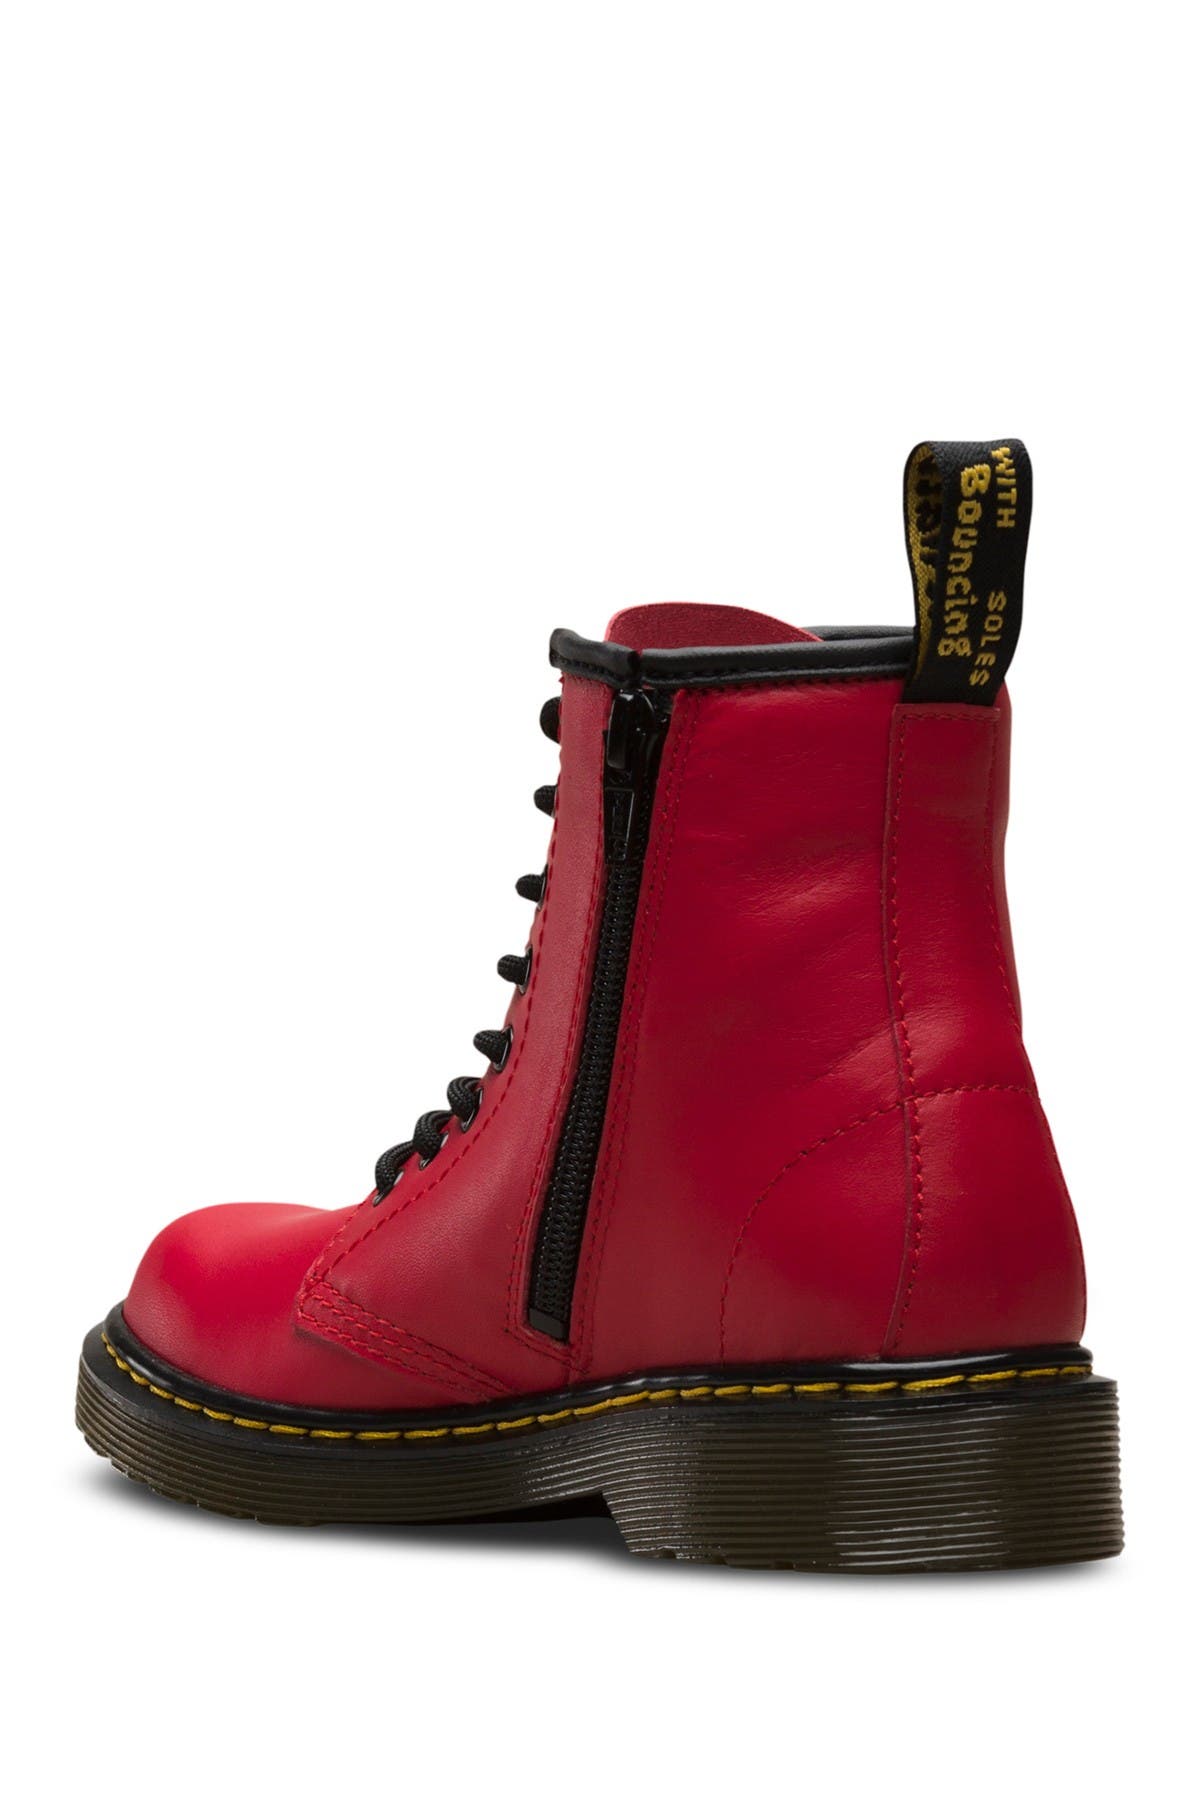 Dr. Martens' Kids' 1460 Lace-up Boot In Light/pastel Red6